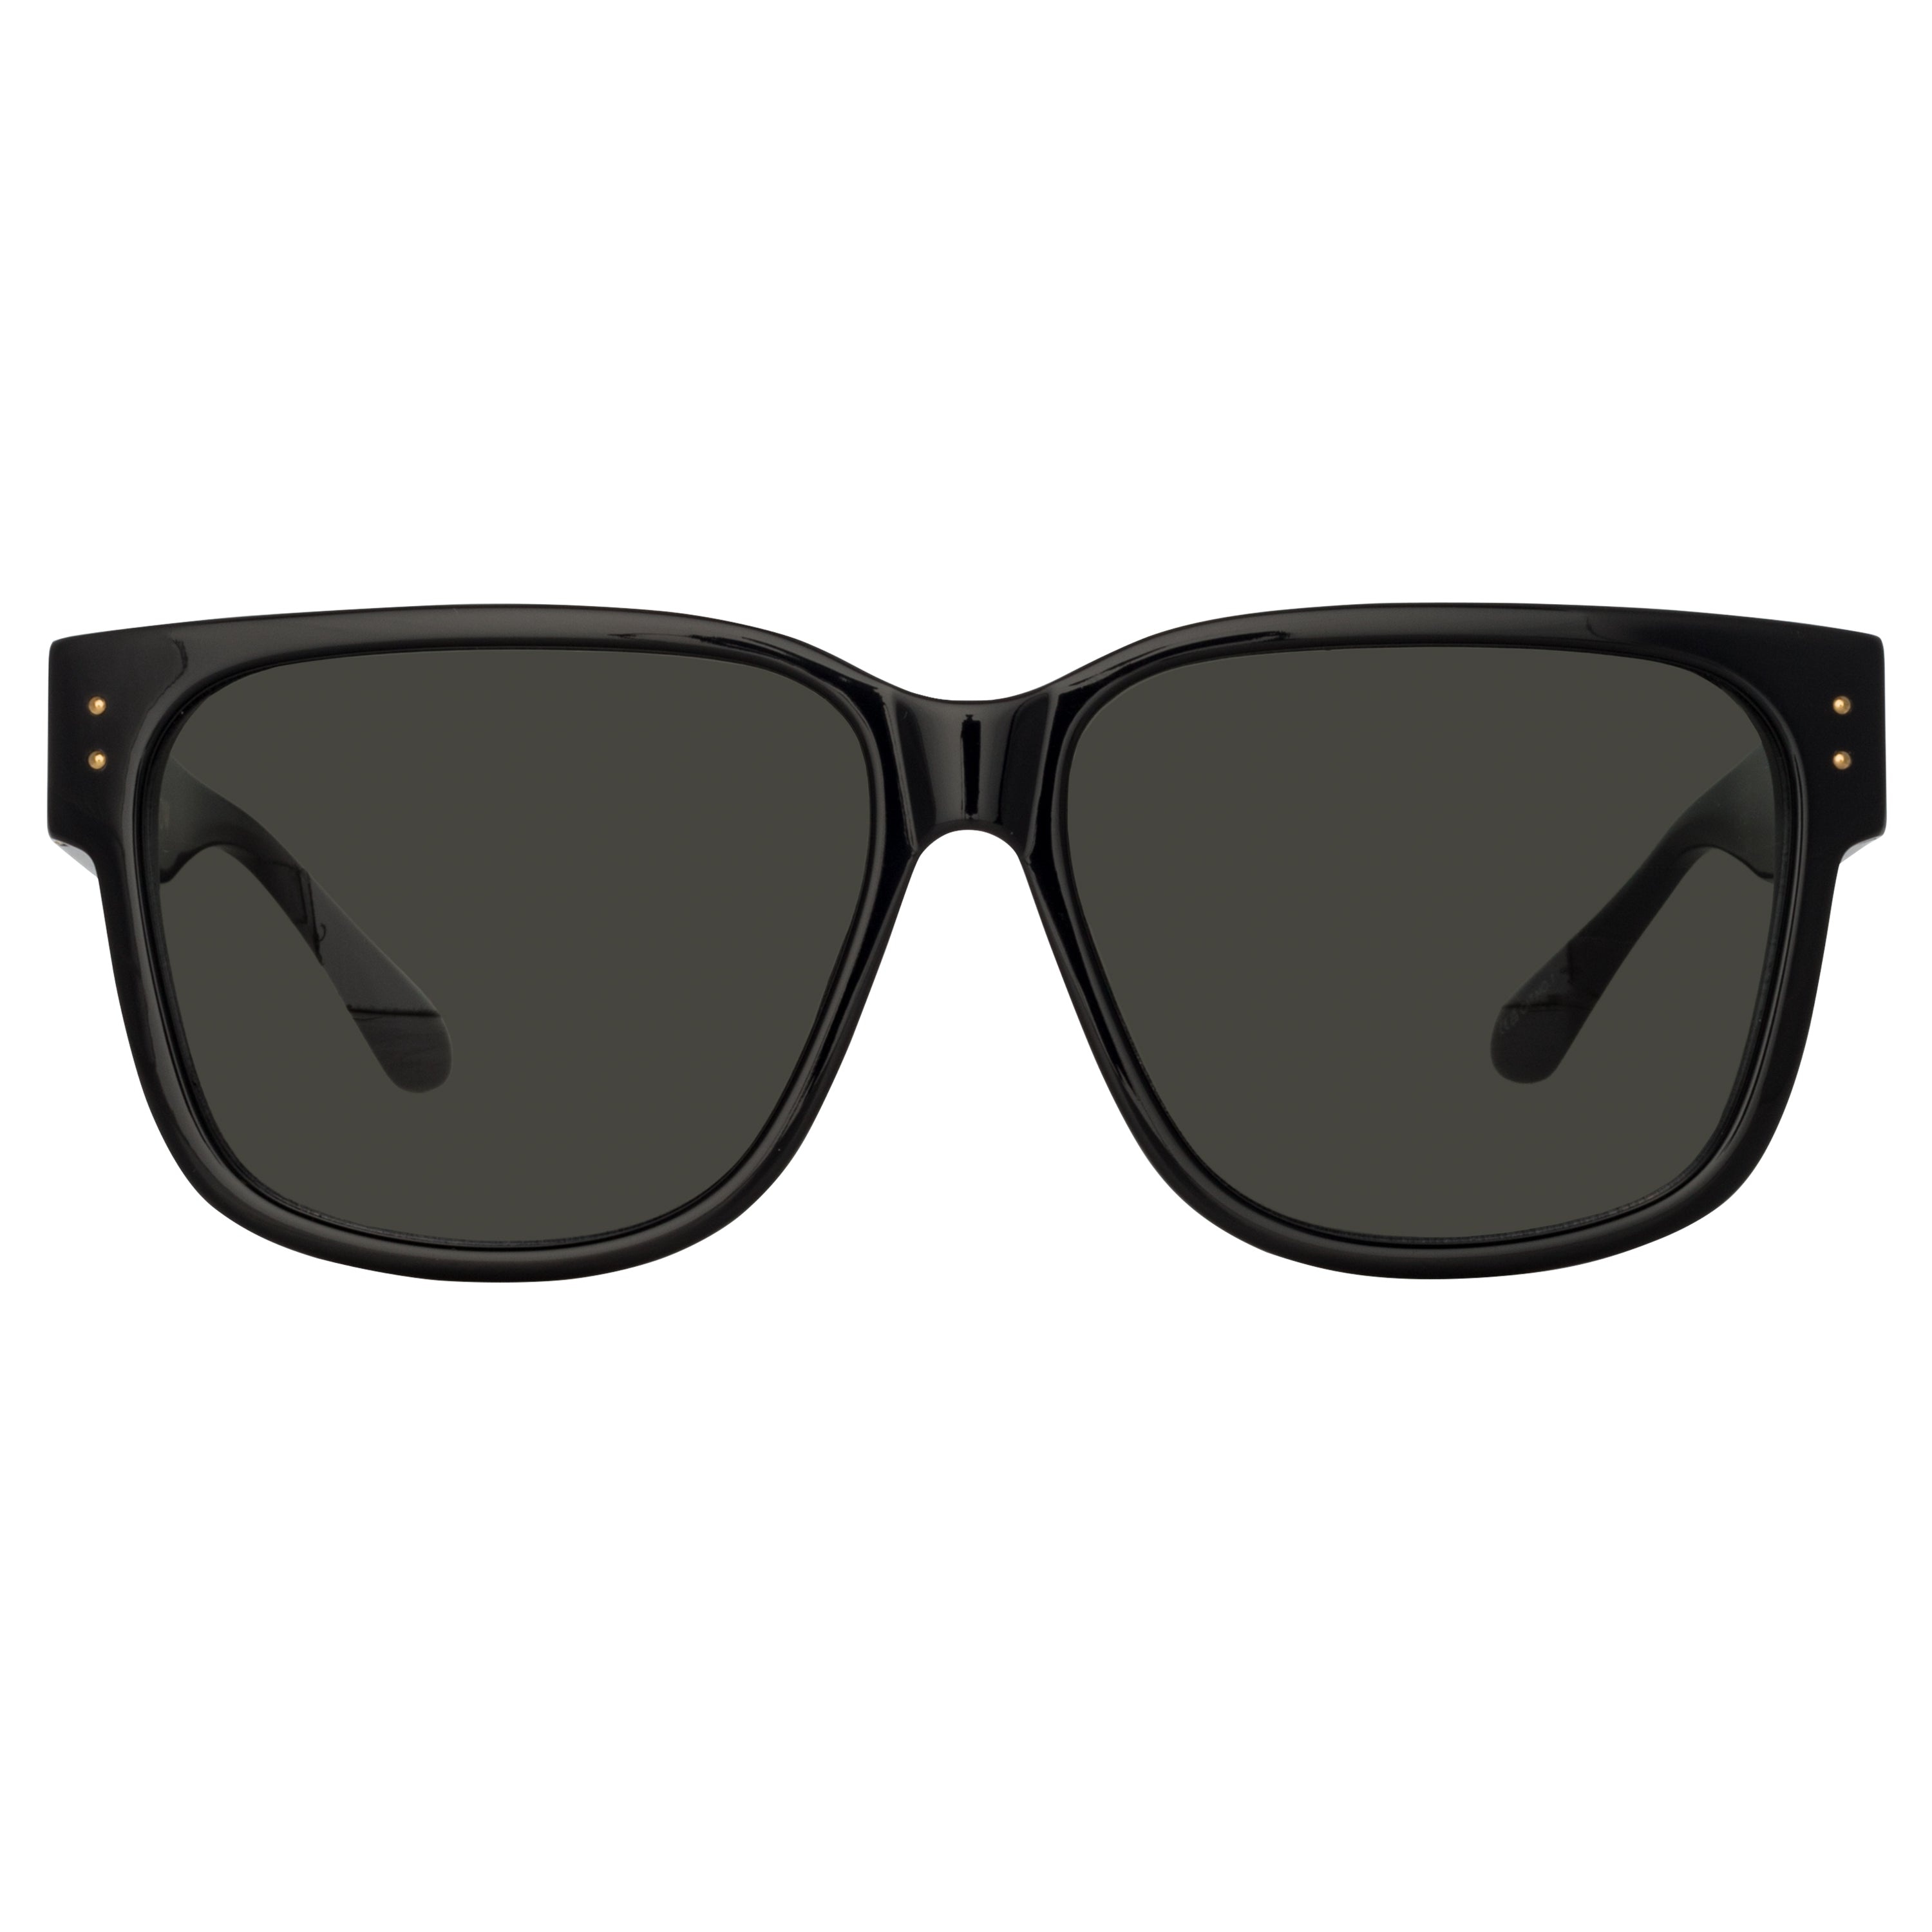 PERRY D-FRAME SUNGLASSES IN BLACK - 1